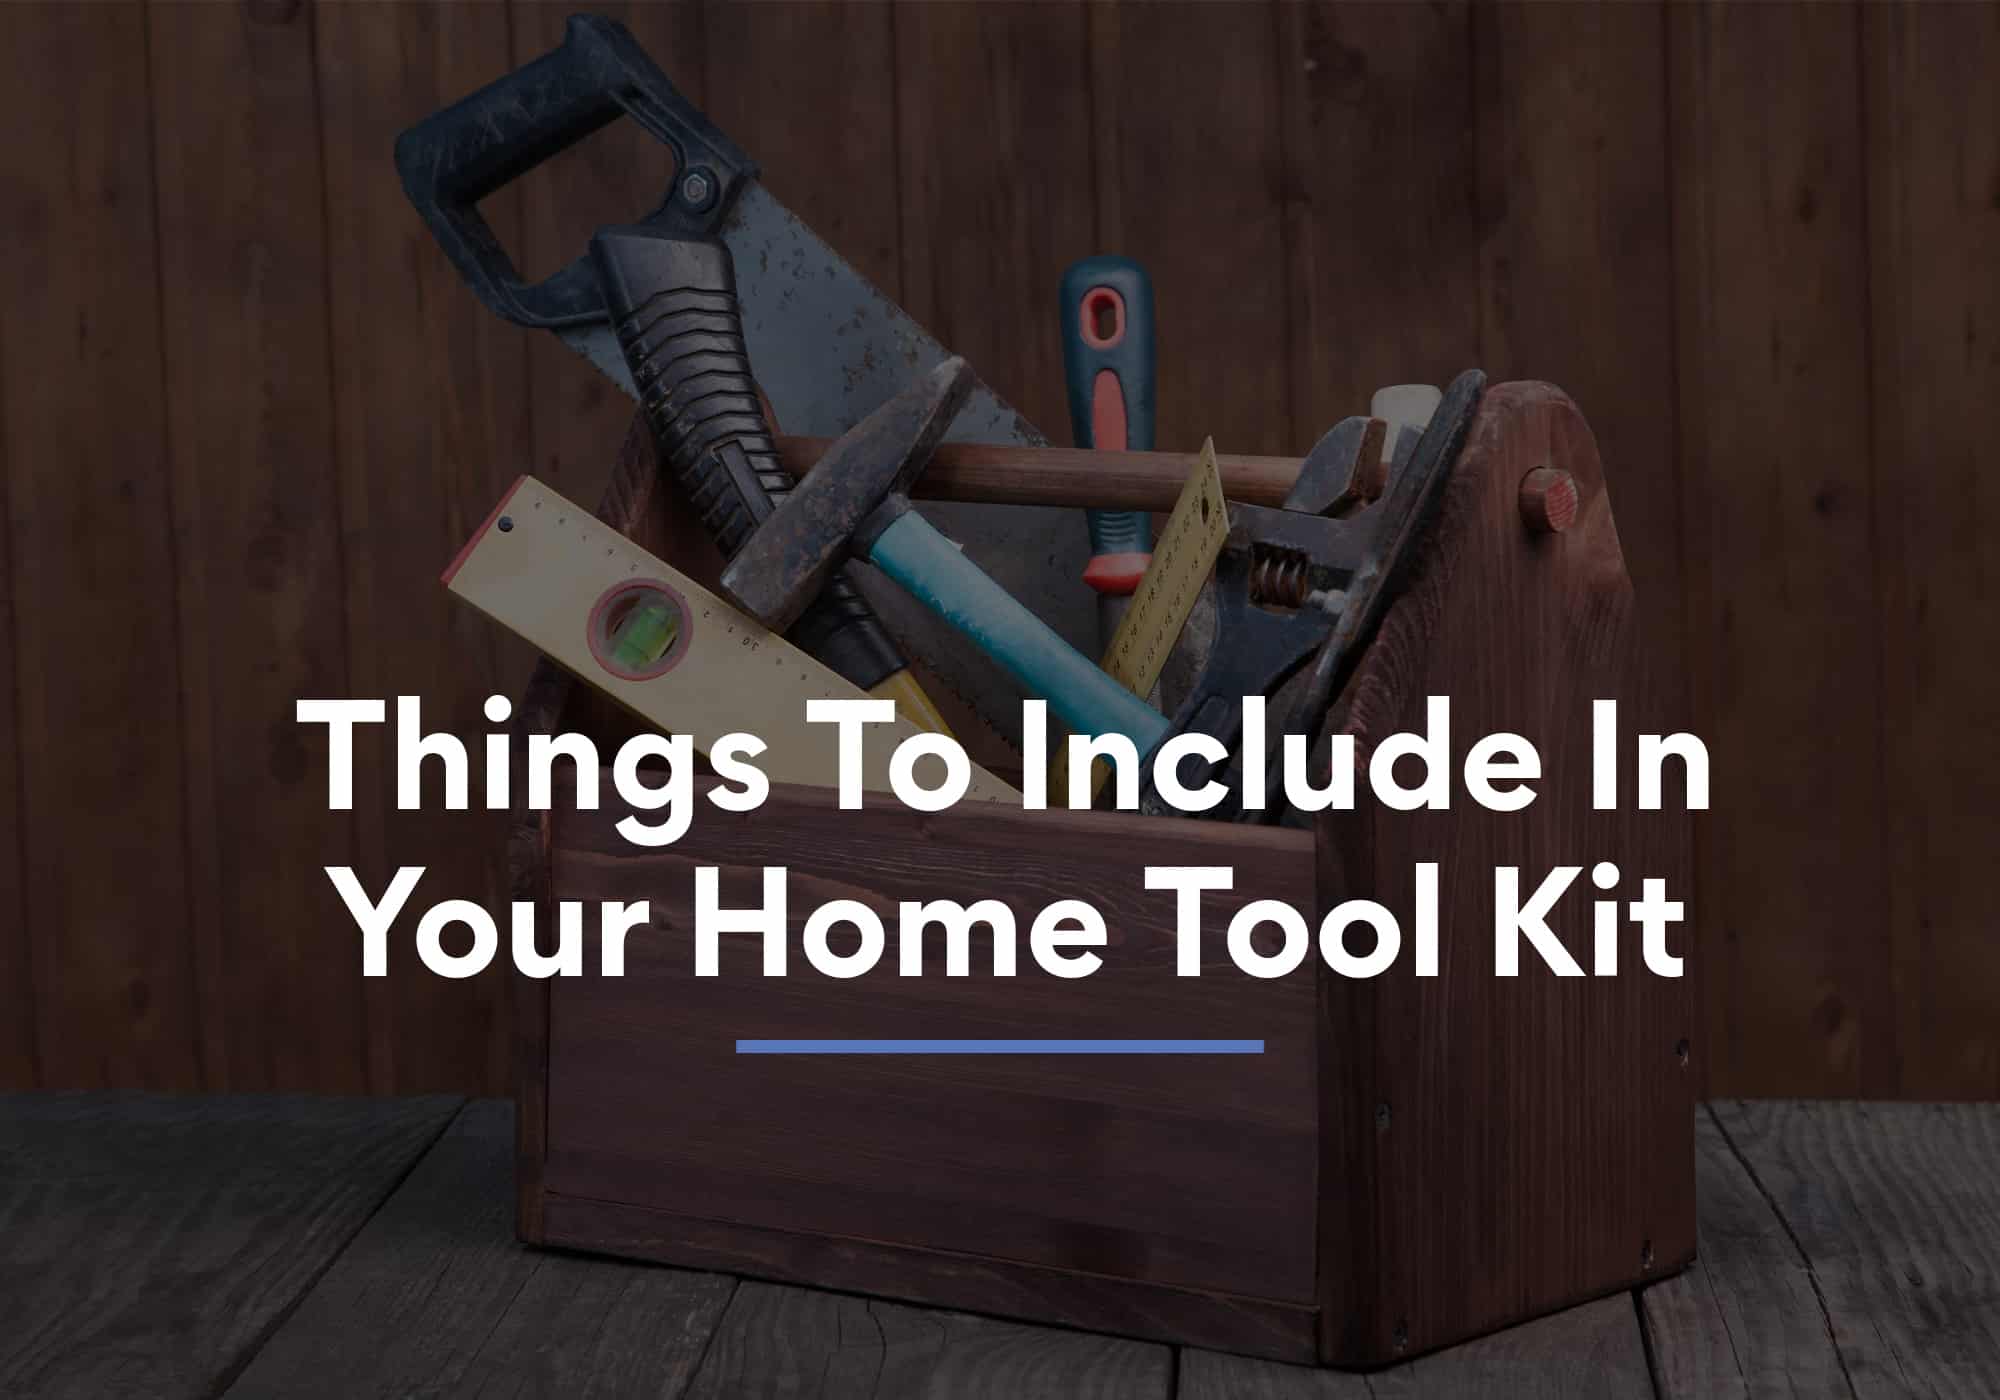 7 Things To Include In Your Home Tool Kit